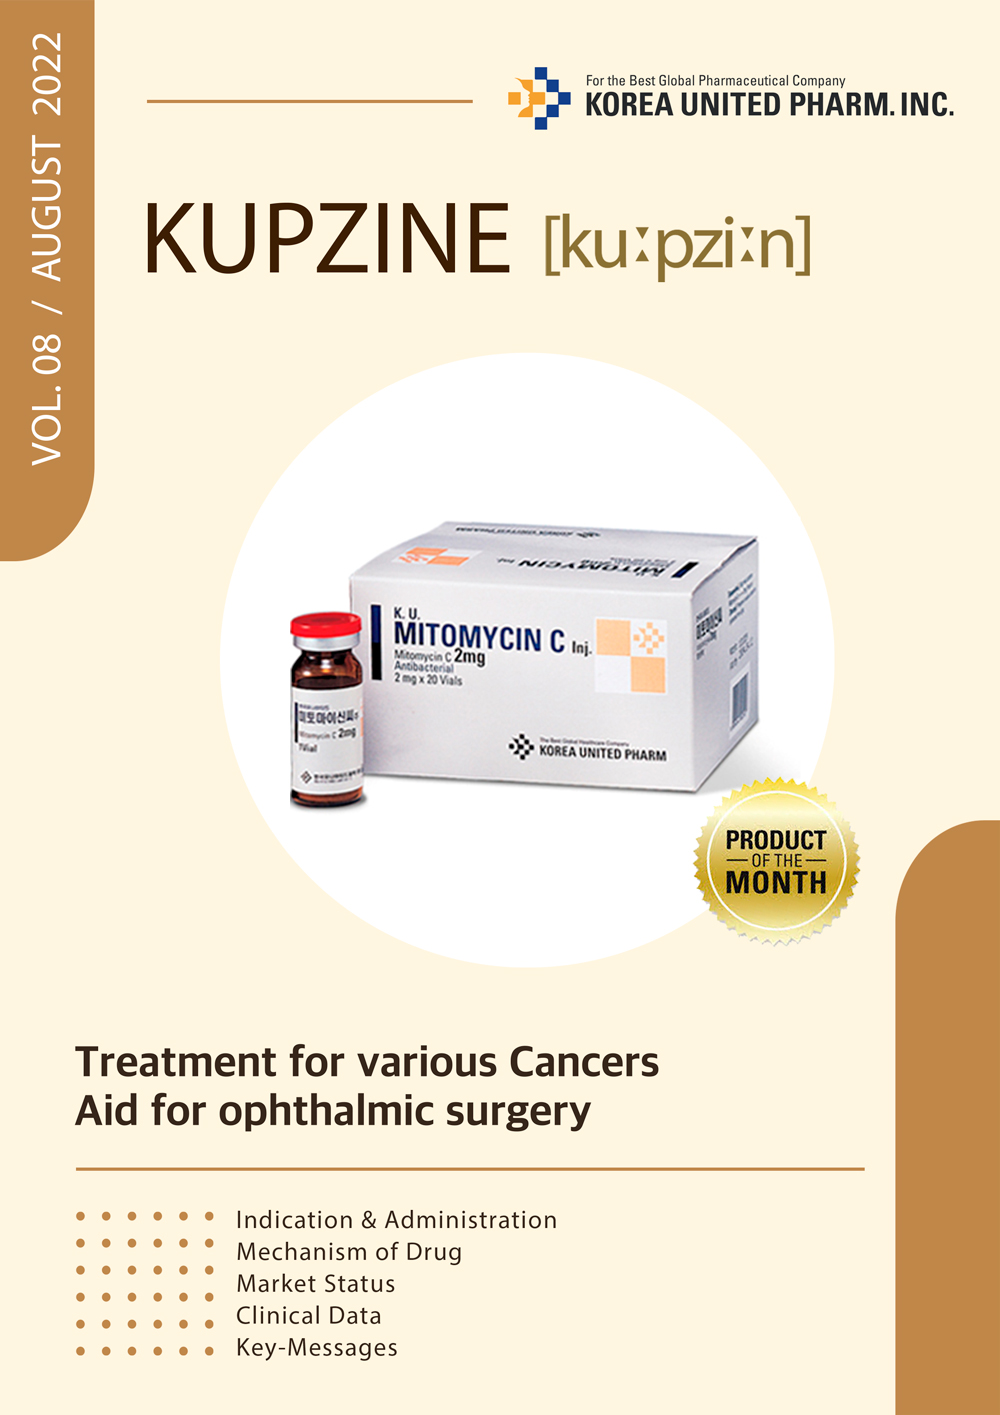 Mitomycin-C, the treatment for various cancers, can be used in ophthalmic surgery such as Glaucoma and Lasik. 